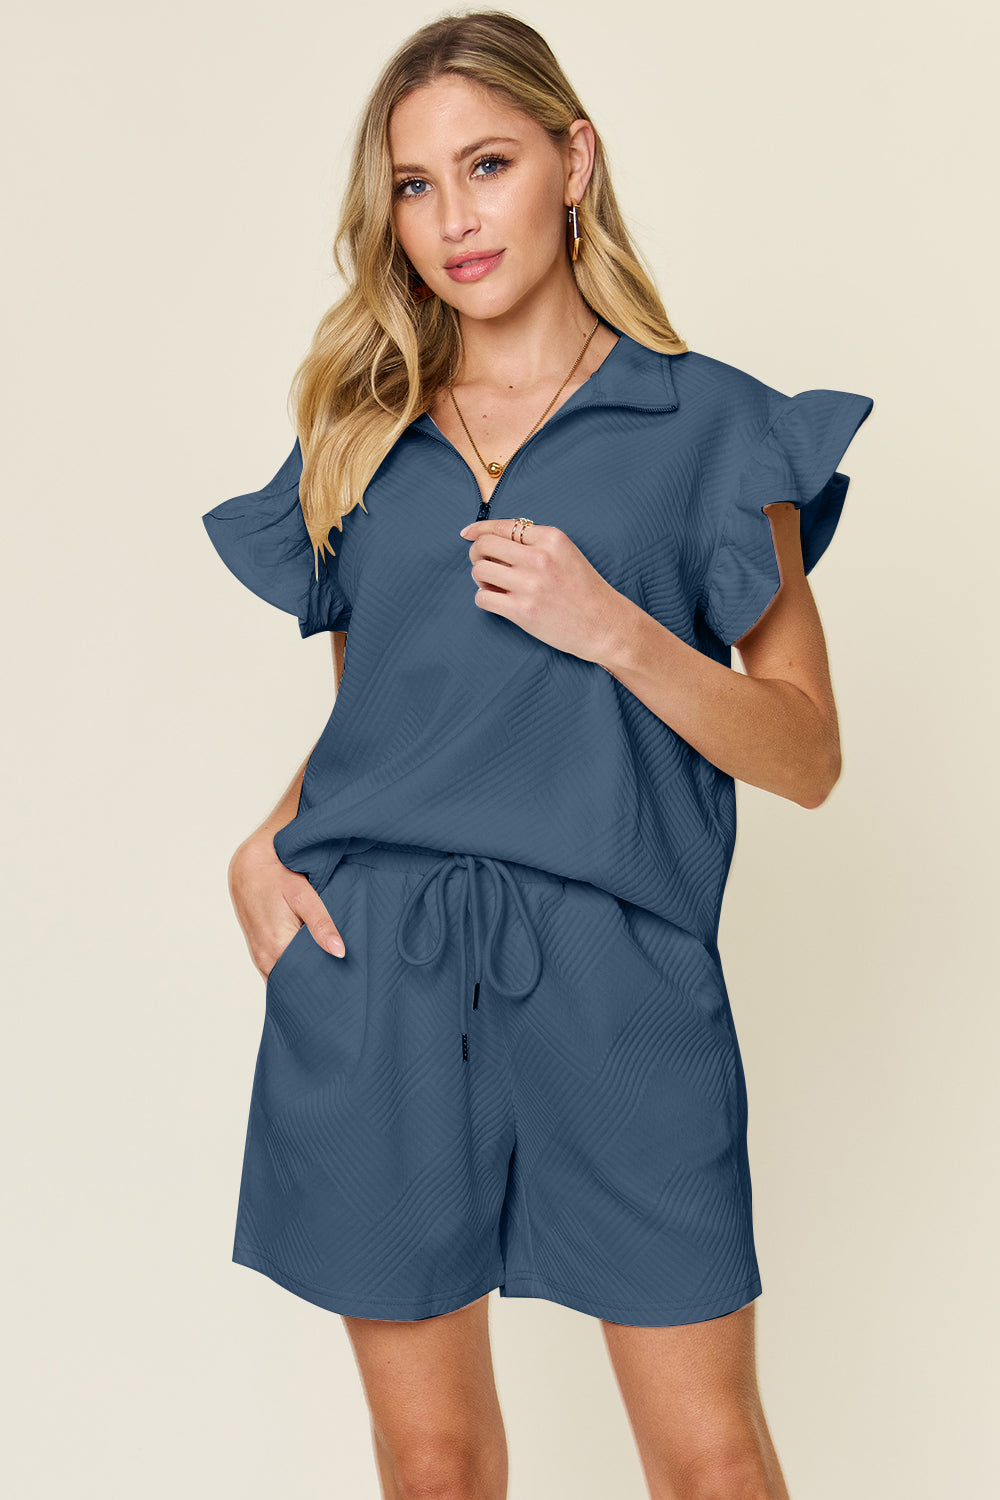 Double Take Texture Flounce Sleeve Top and Drawstring Shorts Set